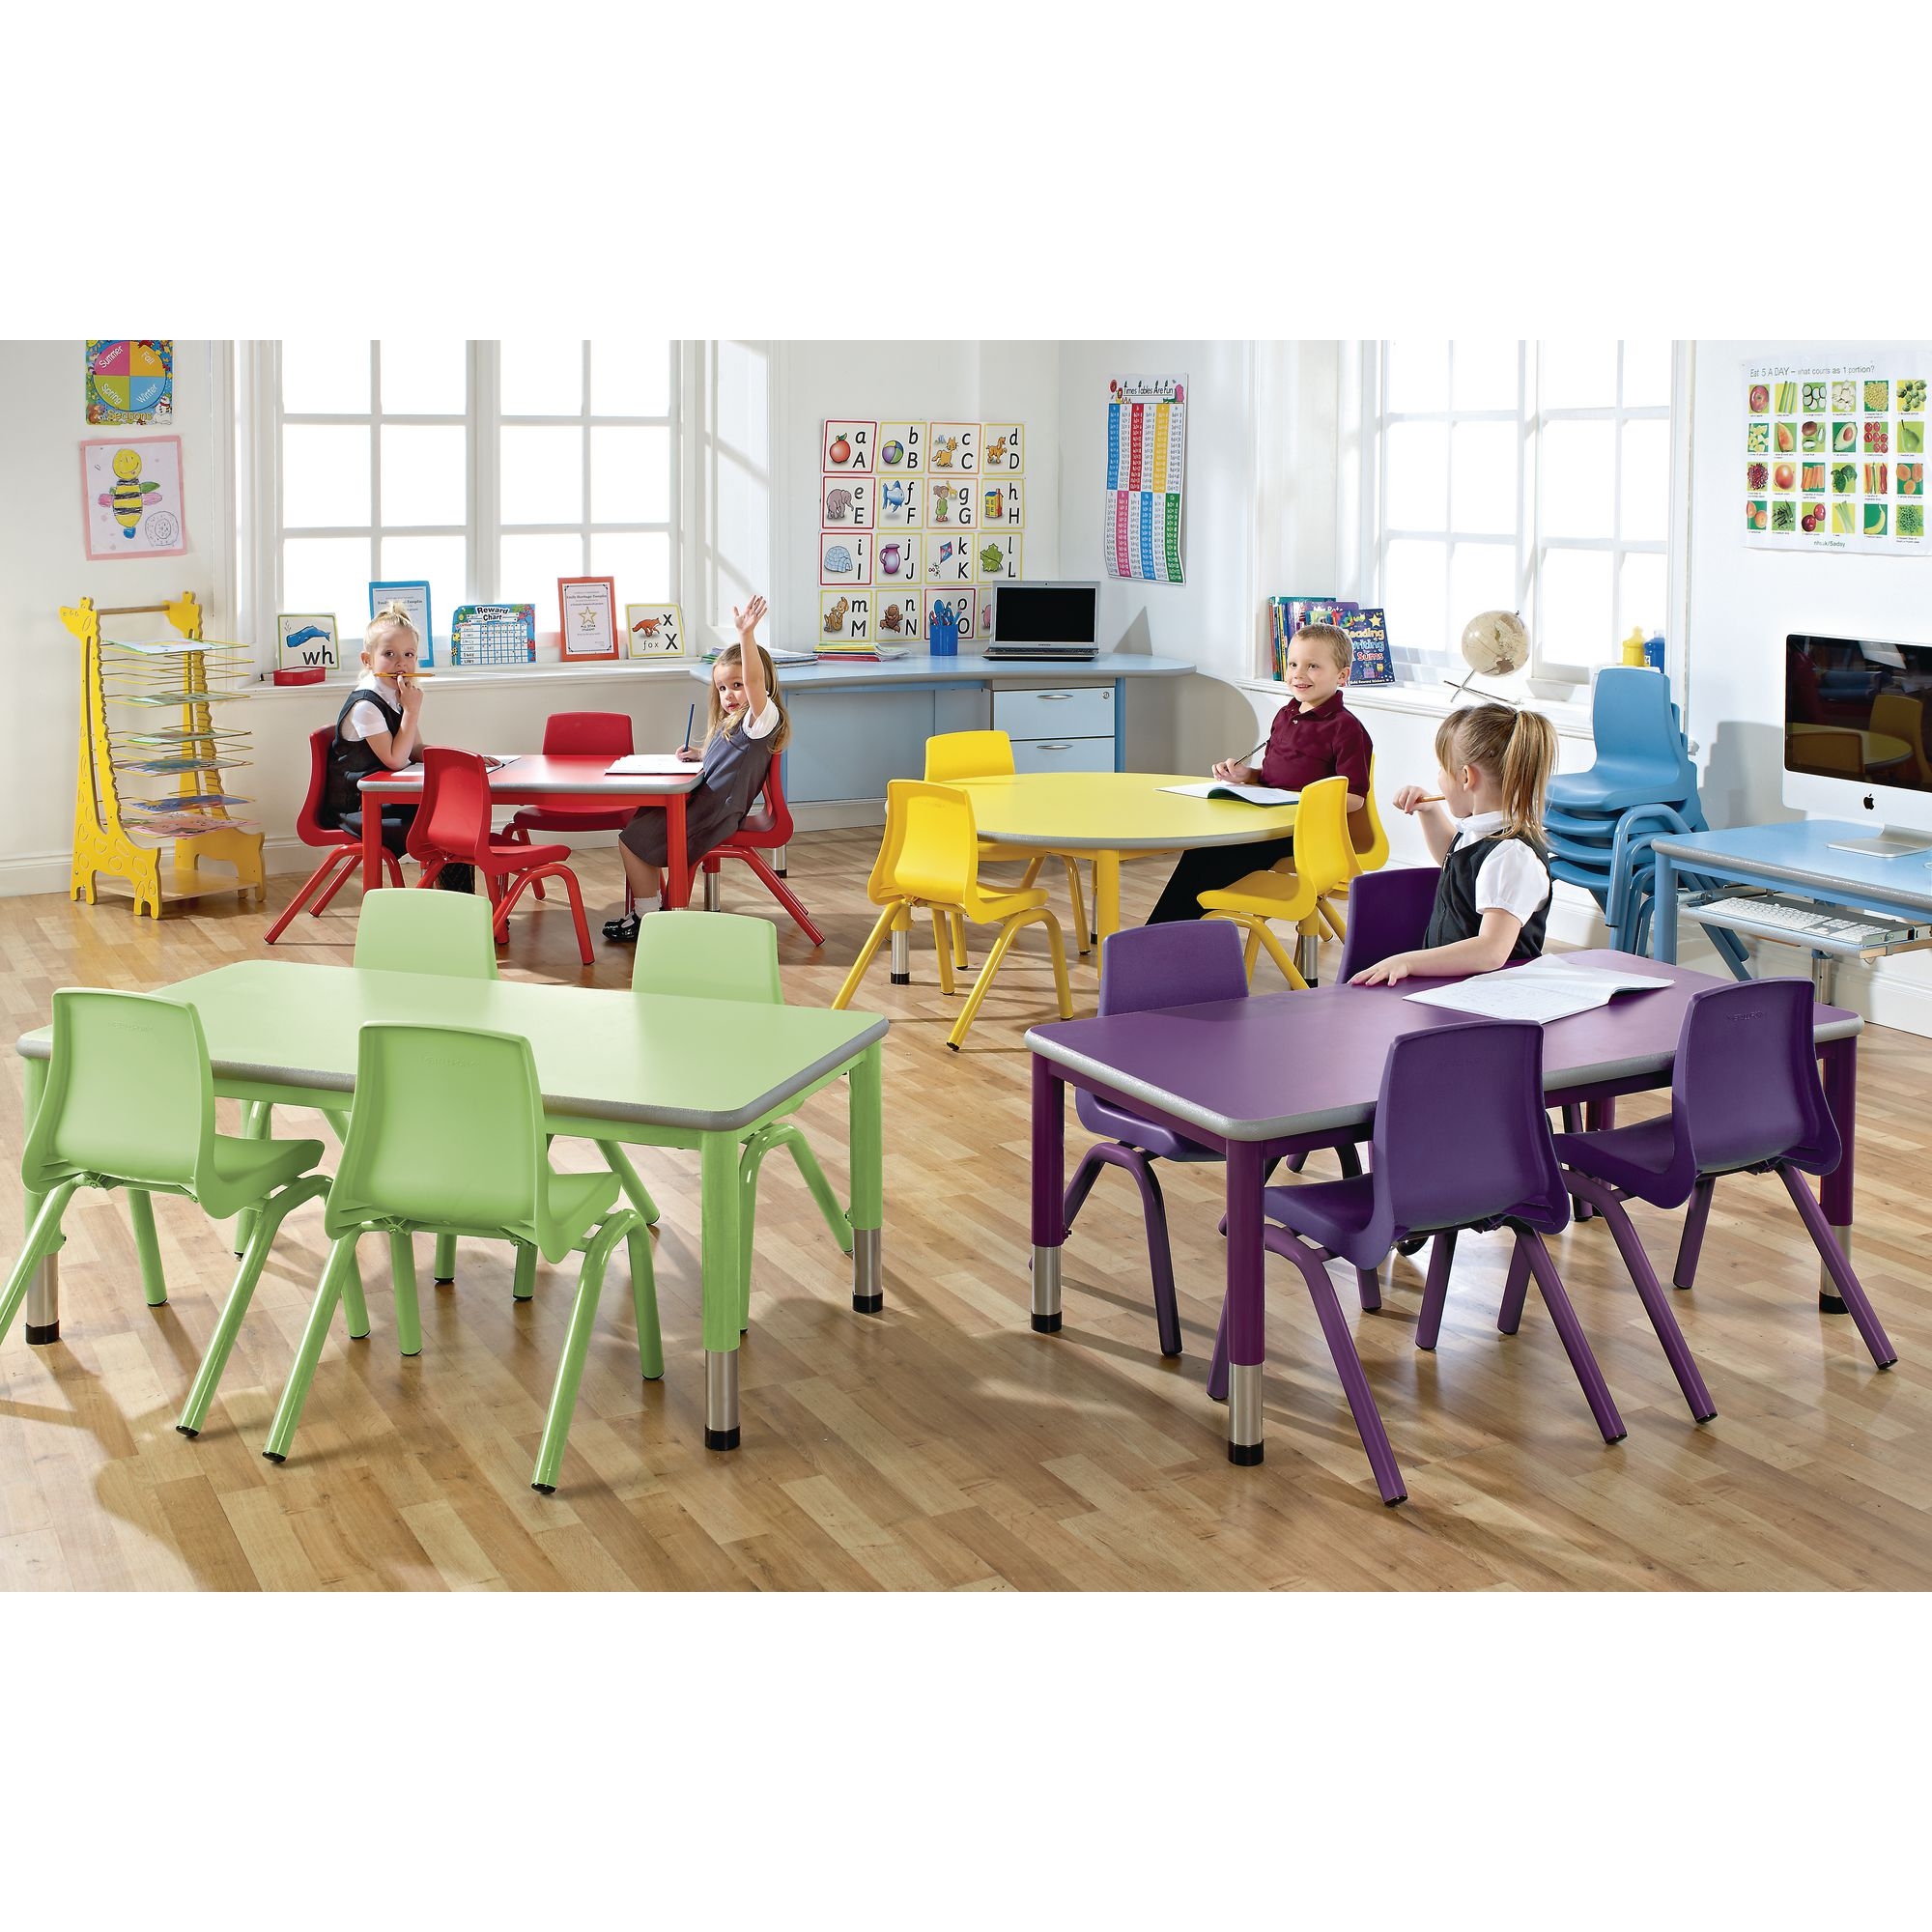 Harlequin Rectangular Height Adjustable Steel Classroom Pack: Table and 4 Chairs - 900 x 600 x 530mm - Yellow